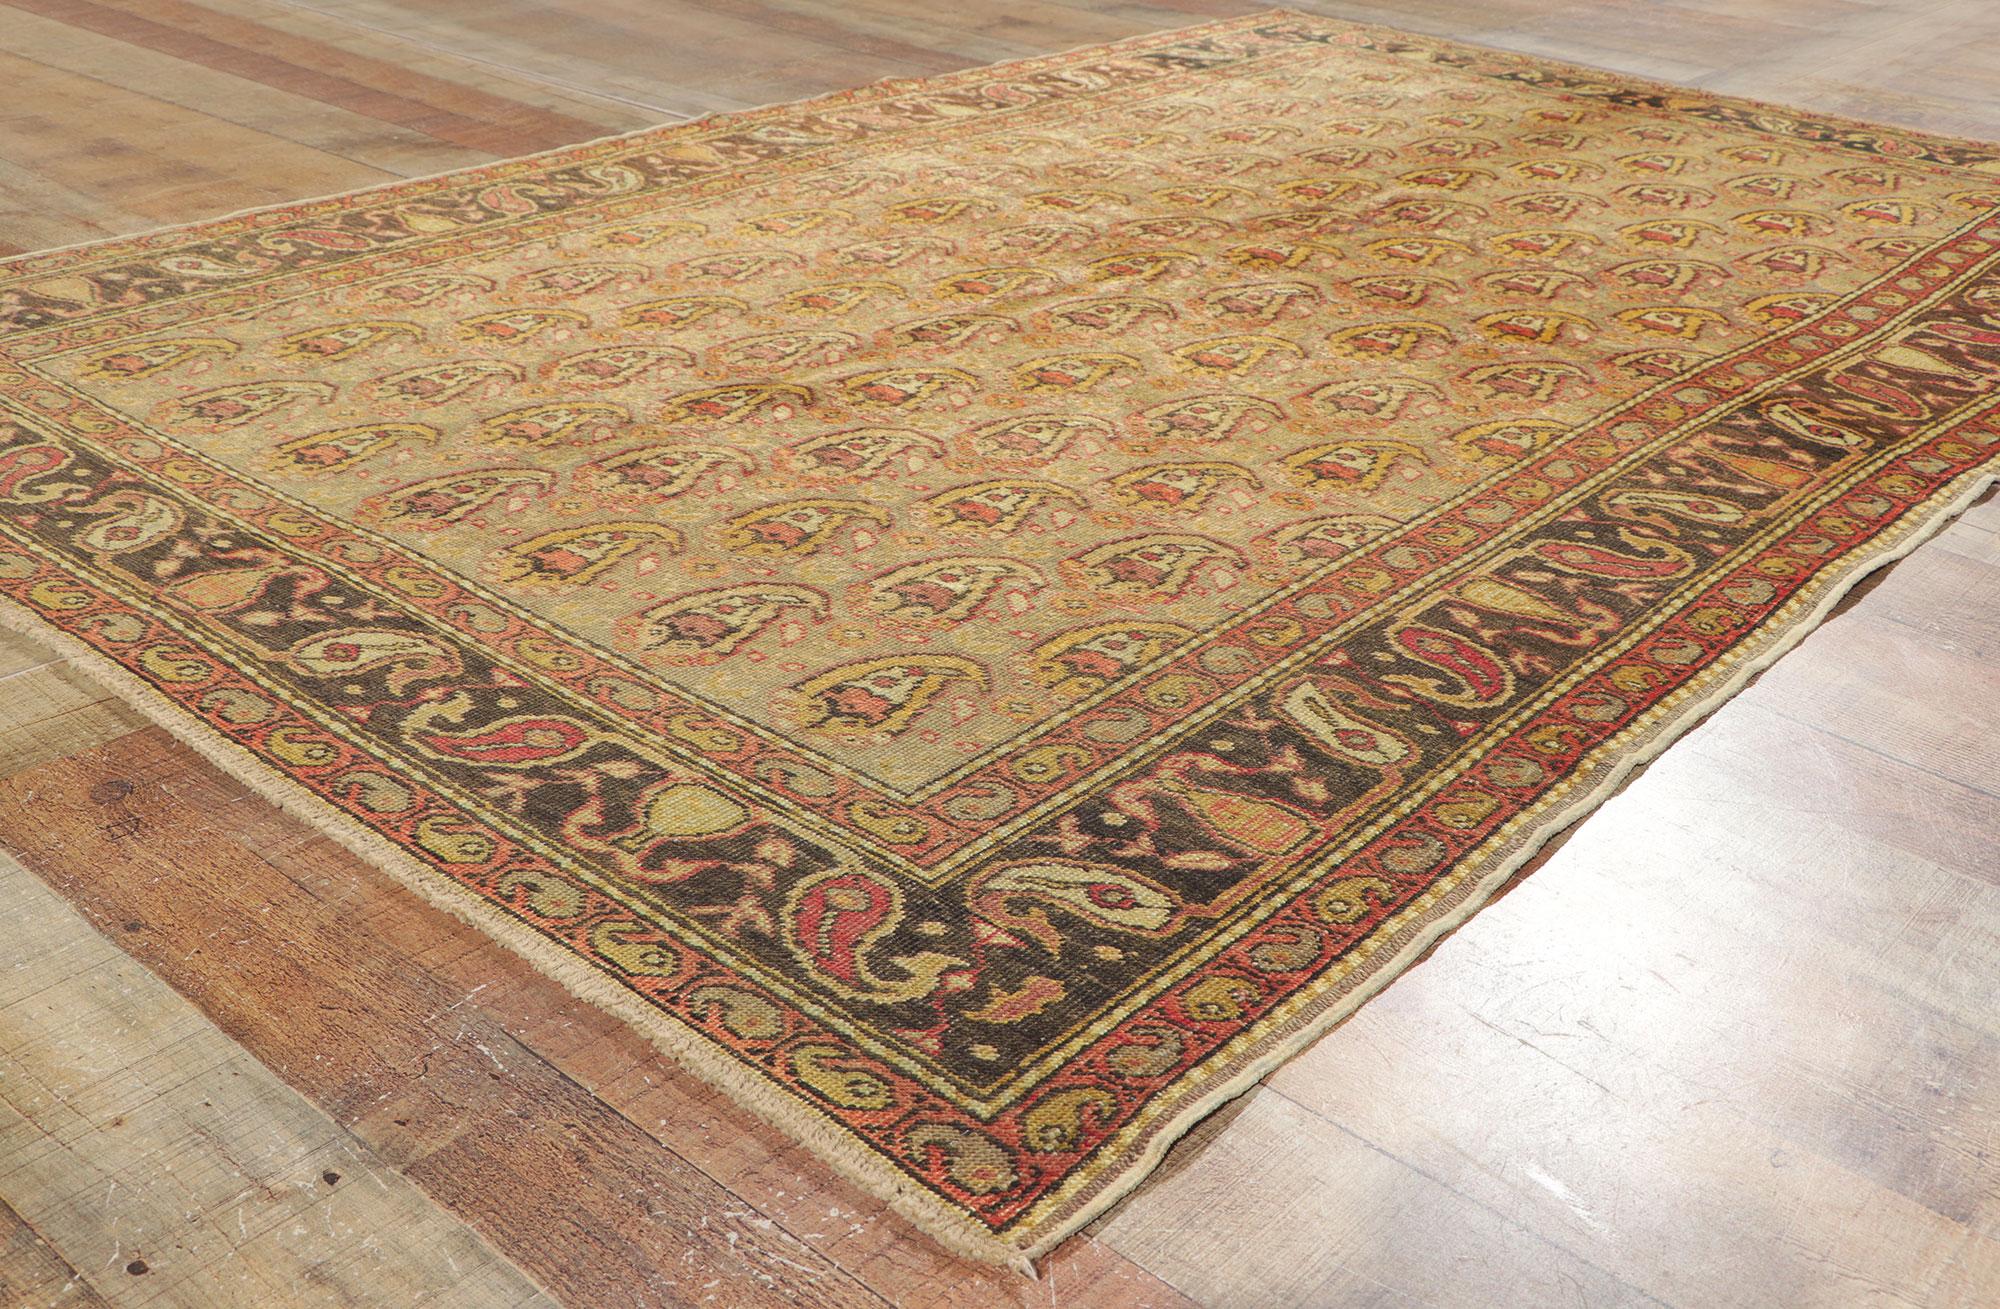 Vintage Turkish Oushak Rug with Rustic Earth-Tone Colors For Sale 1